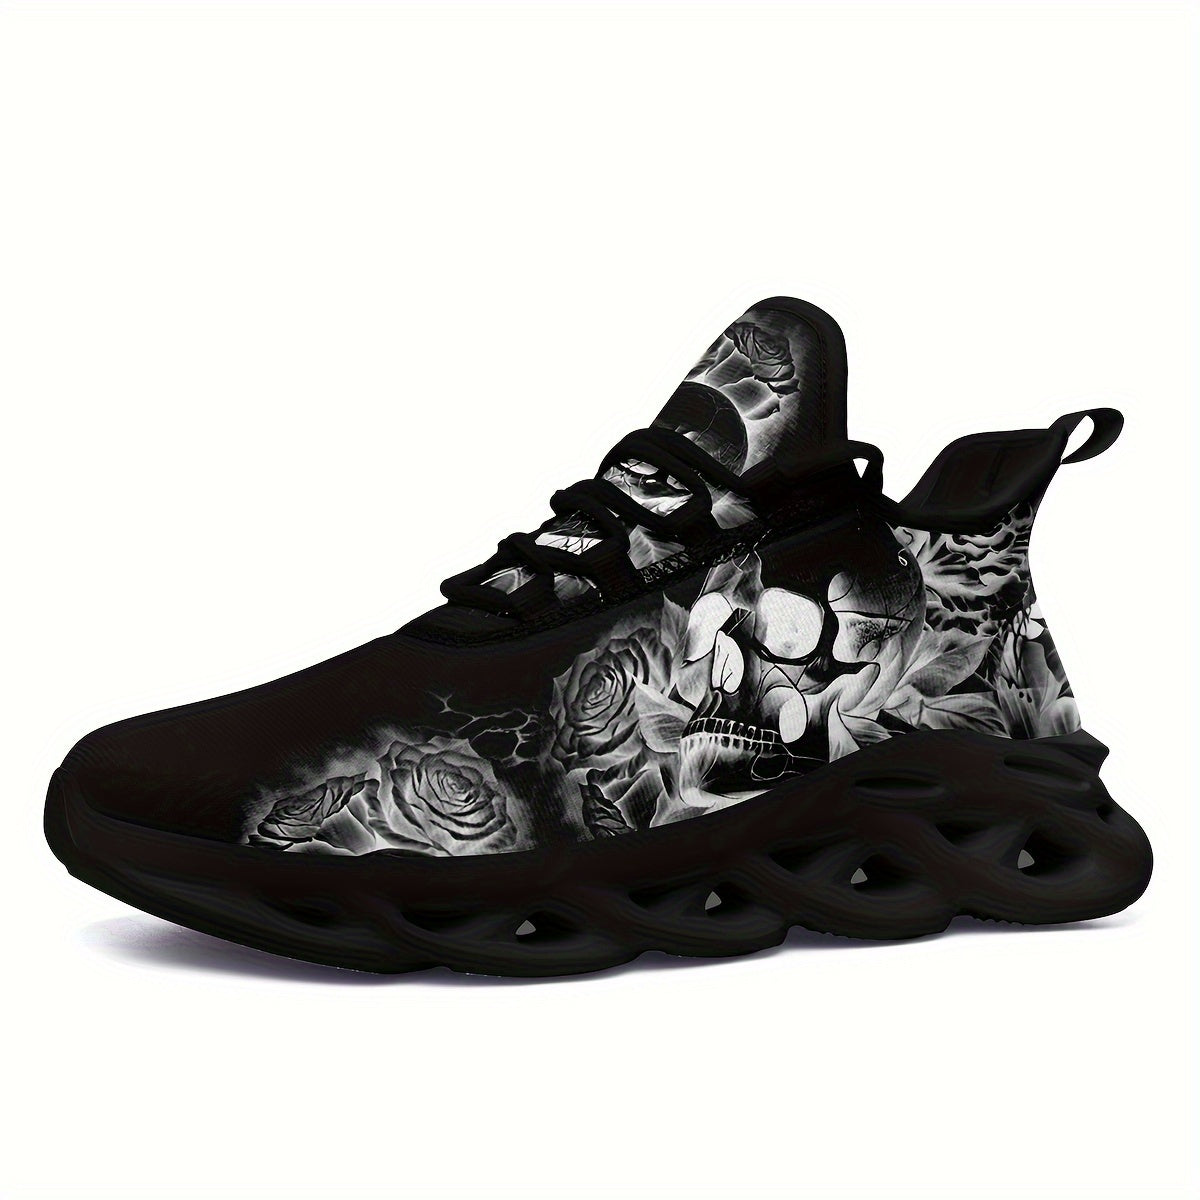 PLUS SIZE Men's Trendy Blade Type Shoes, Comfy Non Slip Shock Absorption Sneakers